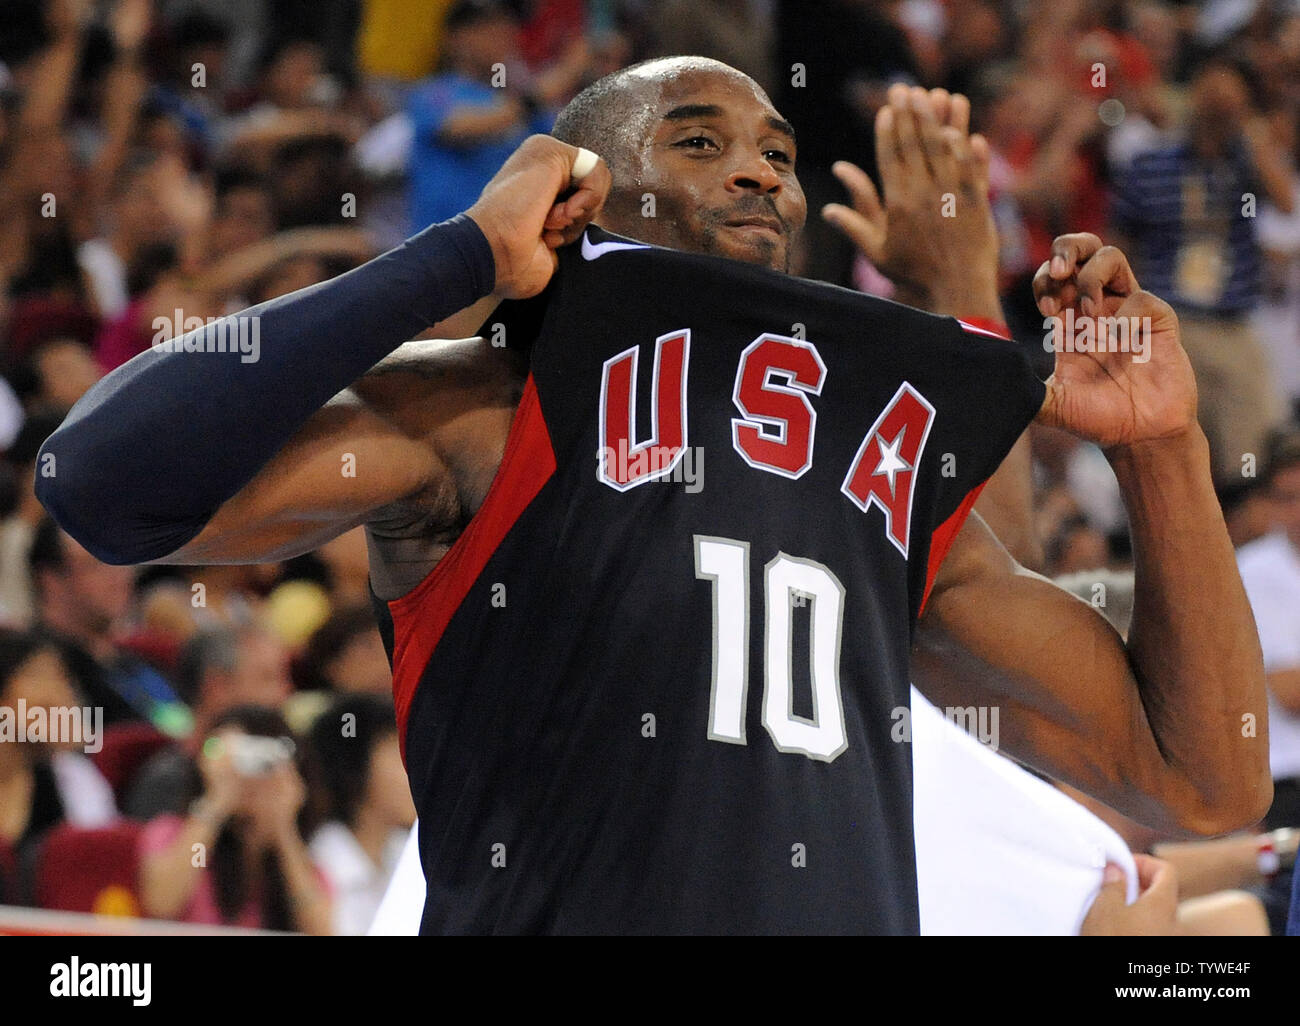 vallei Verwarren Tochi boom USA's Kobe Bryant holds up his USA jersey as he celebrates a win over Spain  to claim the gold medal for Men's Basketball during the 2008 Summer Olympics  in Beijing on August